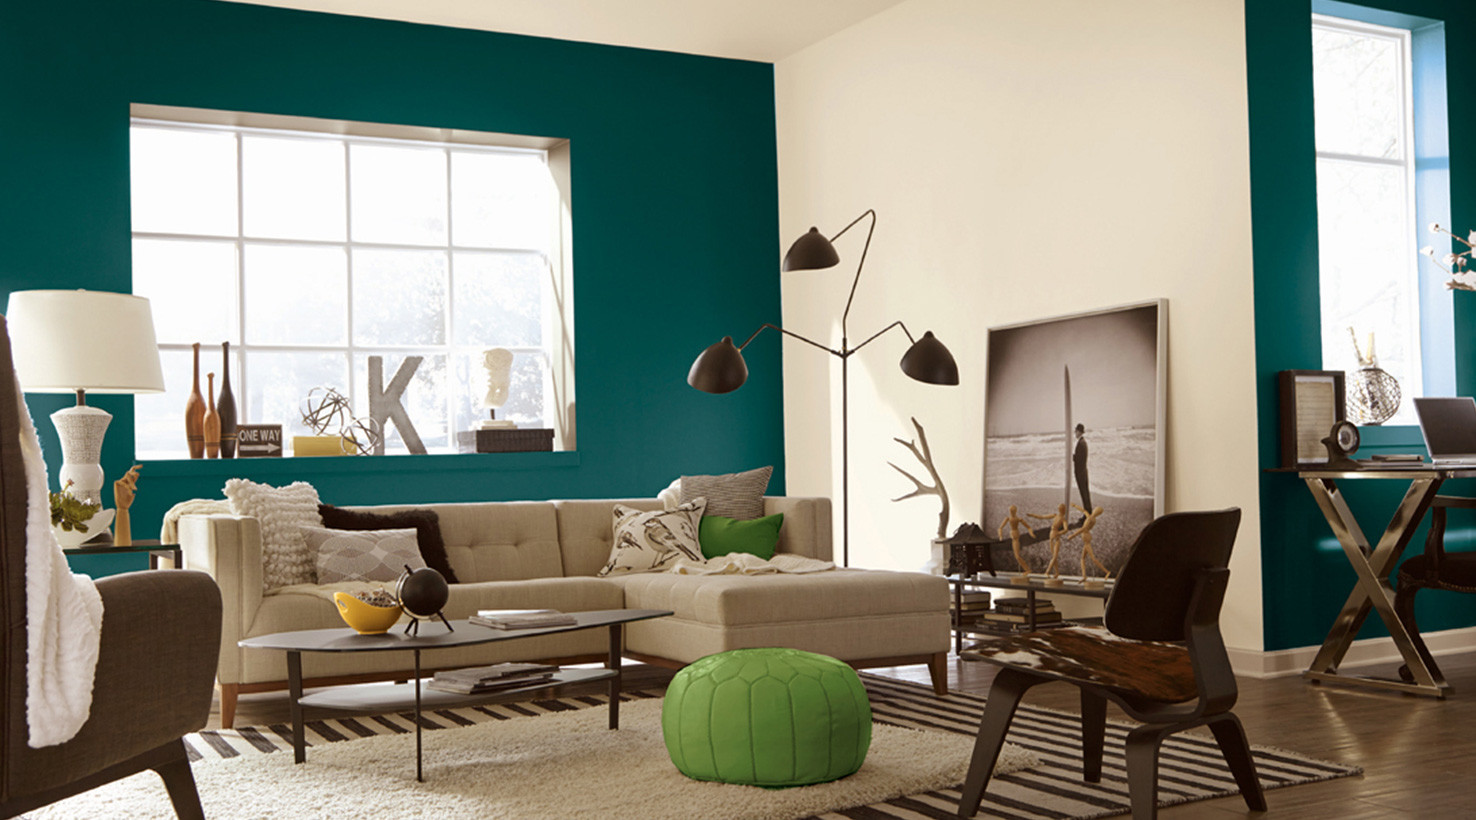 Sherwin Williams Living Room Colors
 Living Room Paint Color Ideas